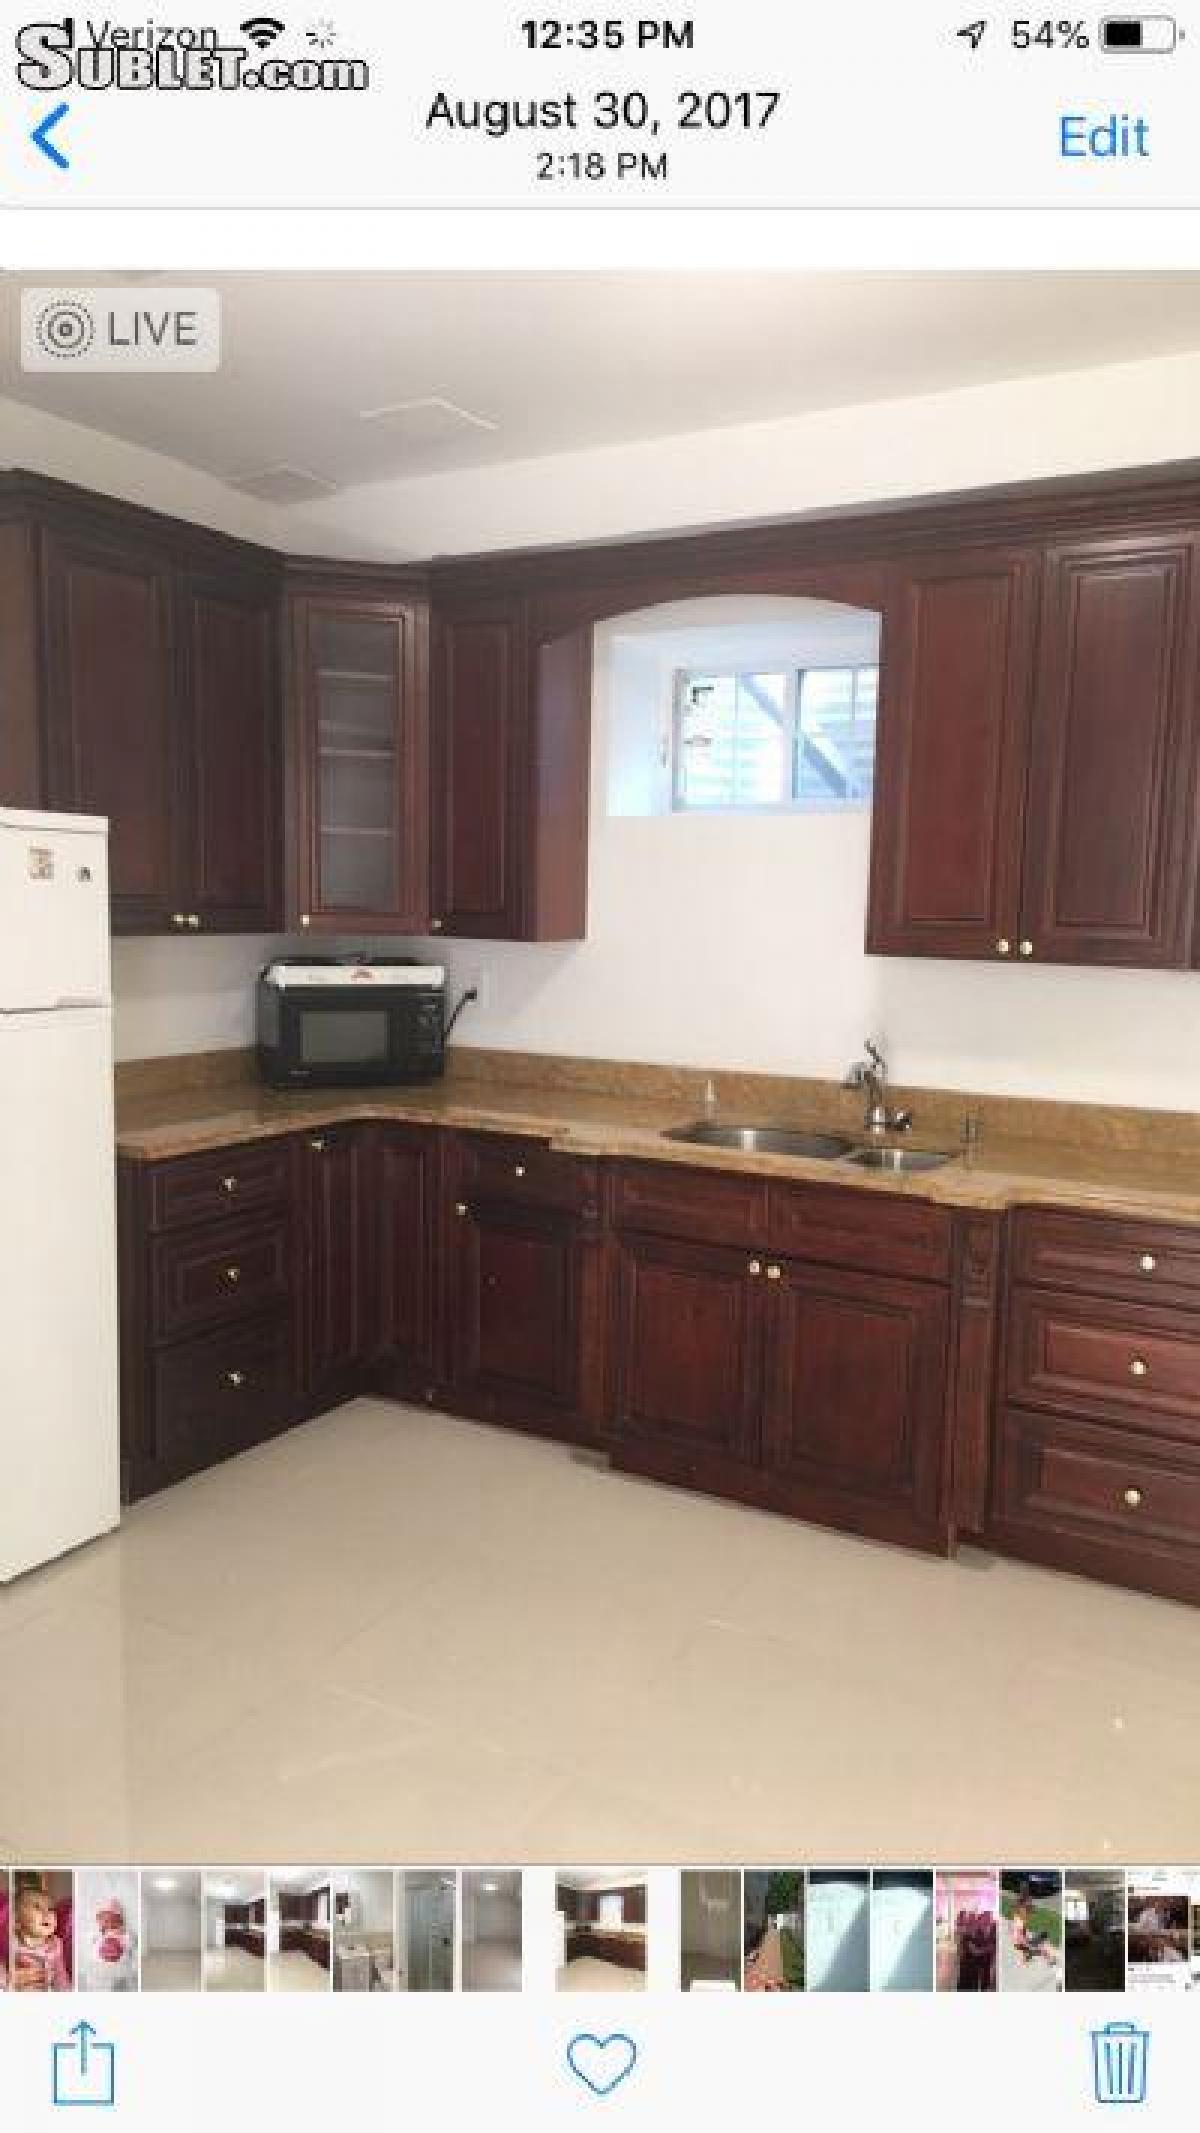 Picture of Apartment For Rent in Nassau, New York, United States